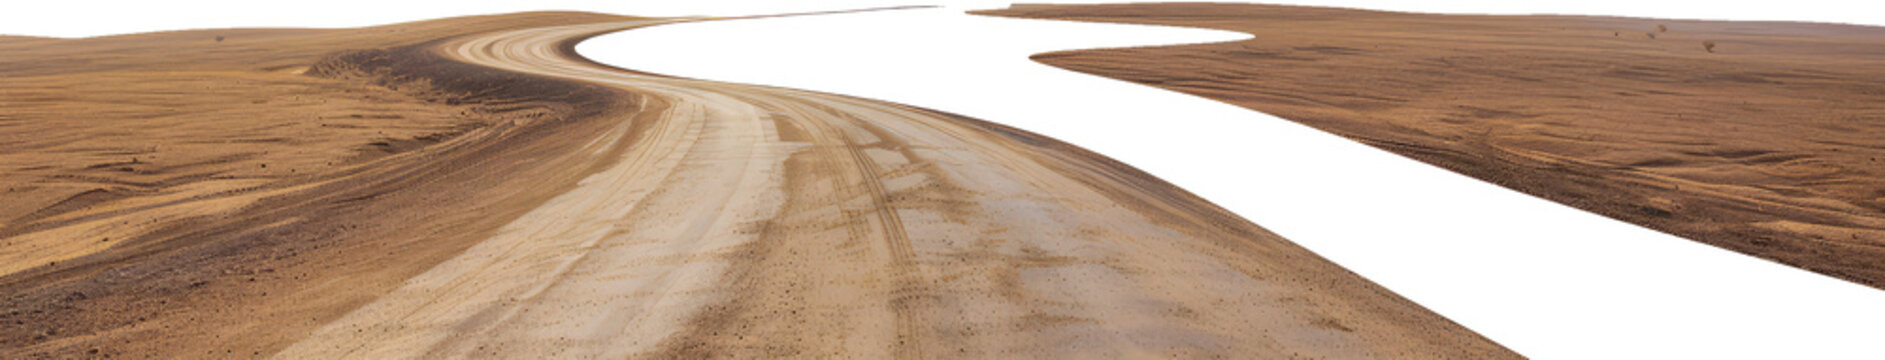 Desert road cutting through sand dunes cut out on transparent background